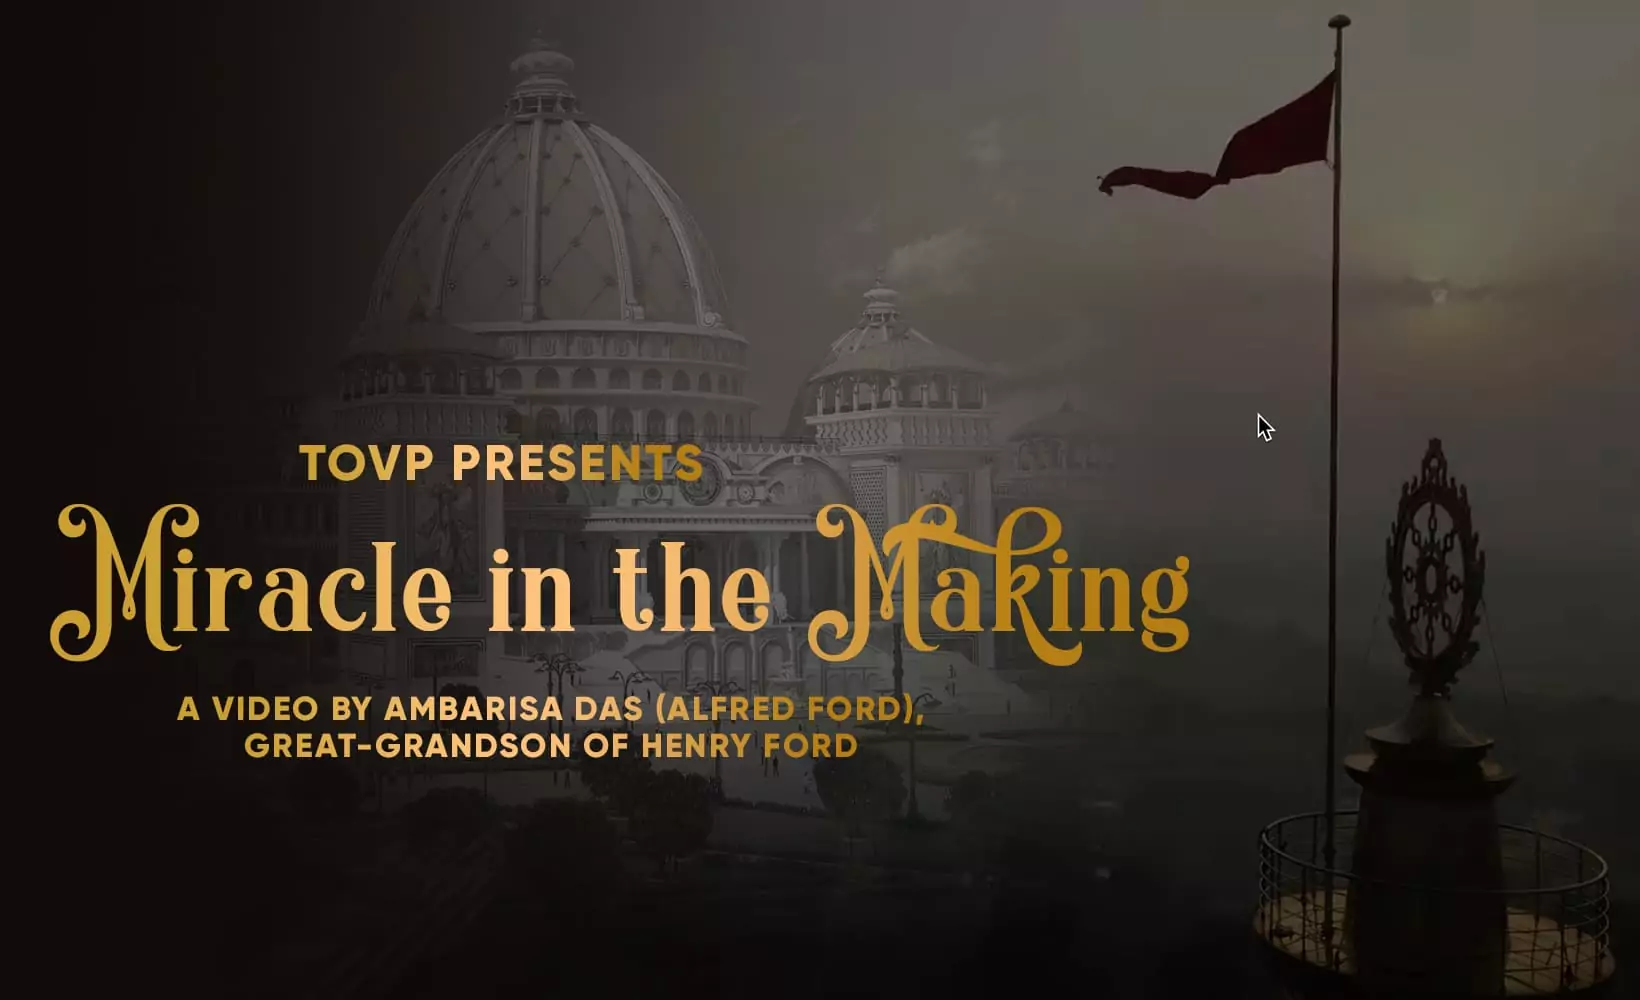 TOVP Presents - Miracle in the Making: A Video by Ambarisa Das (Alfred Ford), Great-grandson of Henry Ford